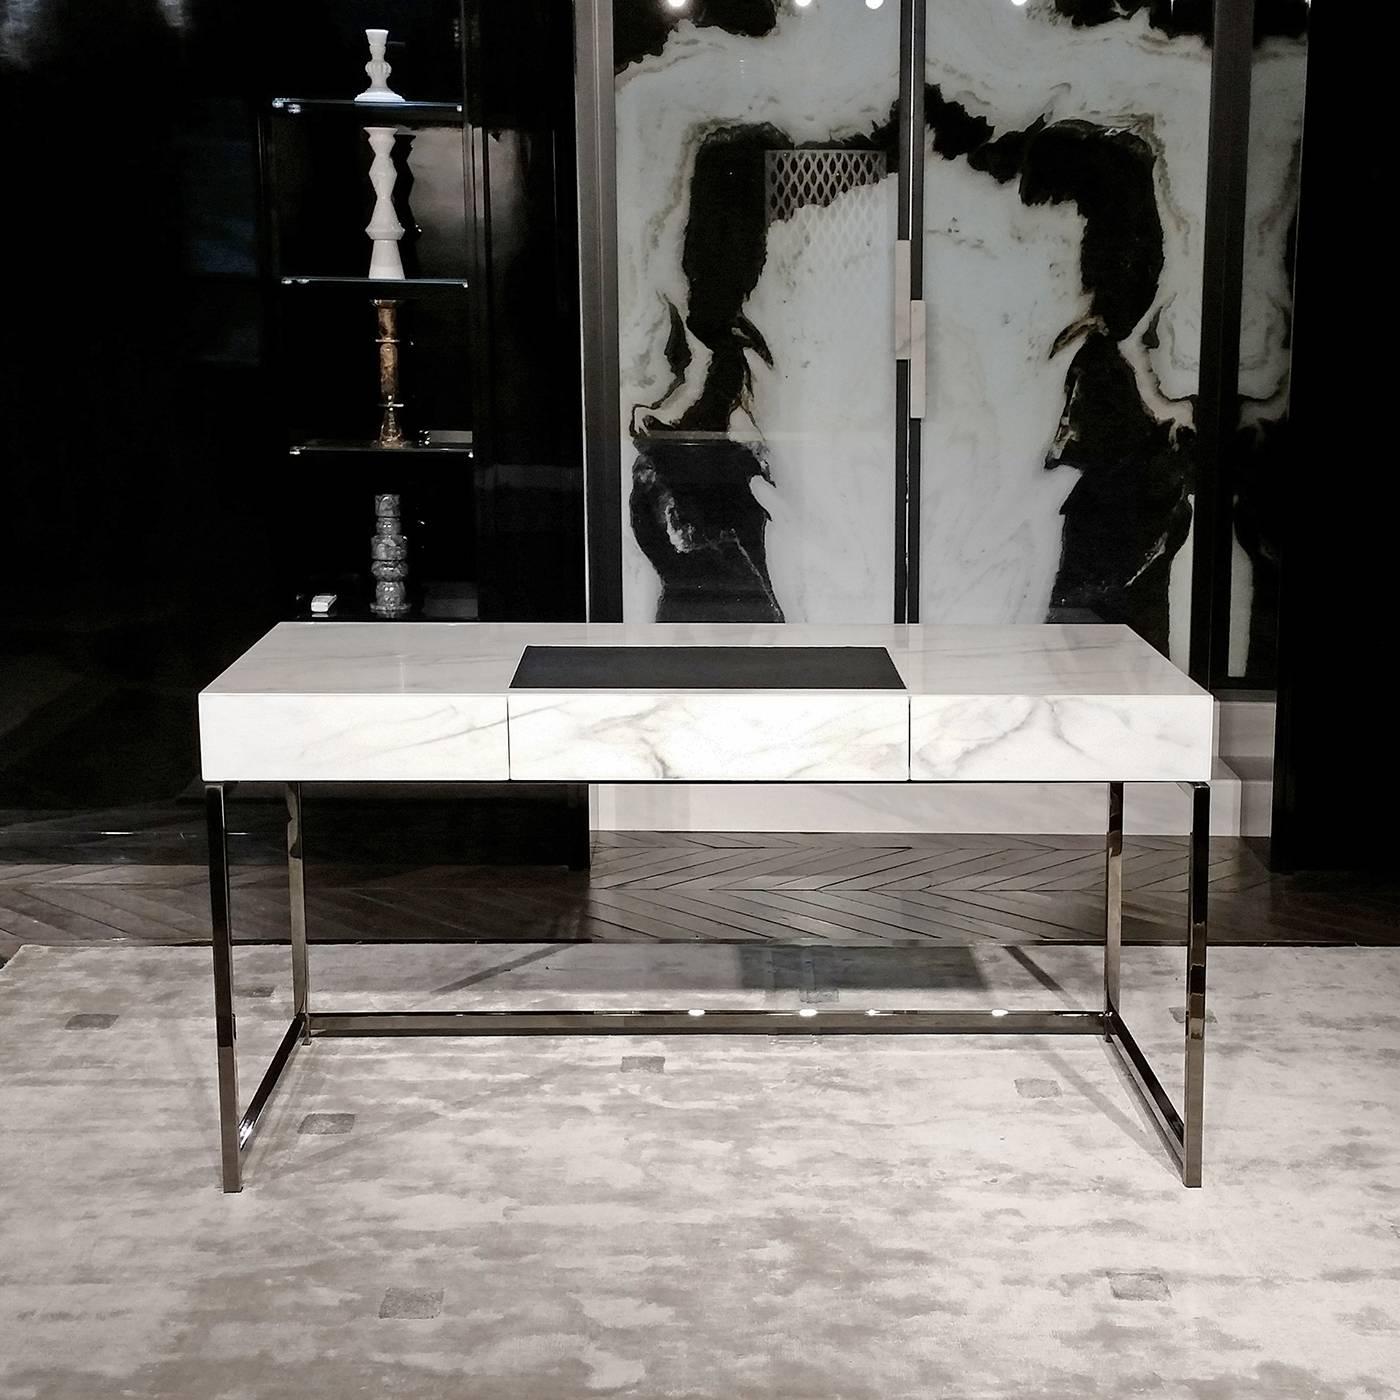 Ideal as elegant desk in a study or exquisite console in a living room or entryway, this superb piece of functional decor is a precious addition to any home. It was designed by Joe Gentile and Fabio Crippa of Studio ADL and boasts a top in white